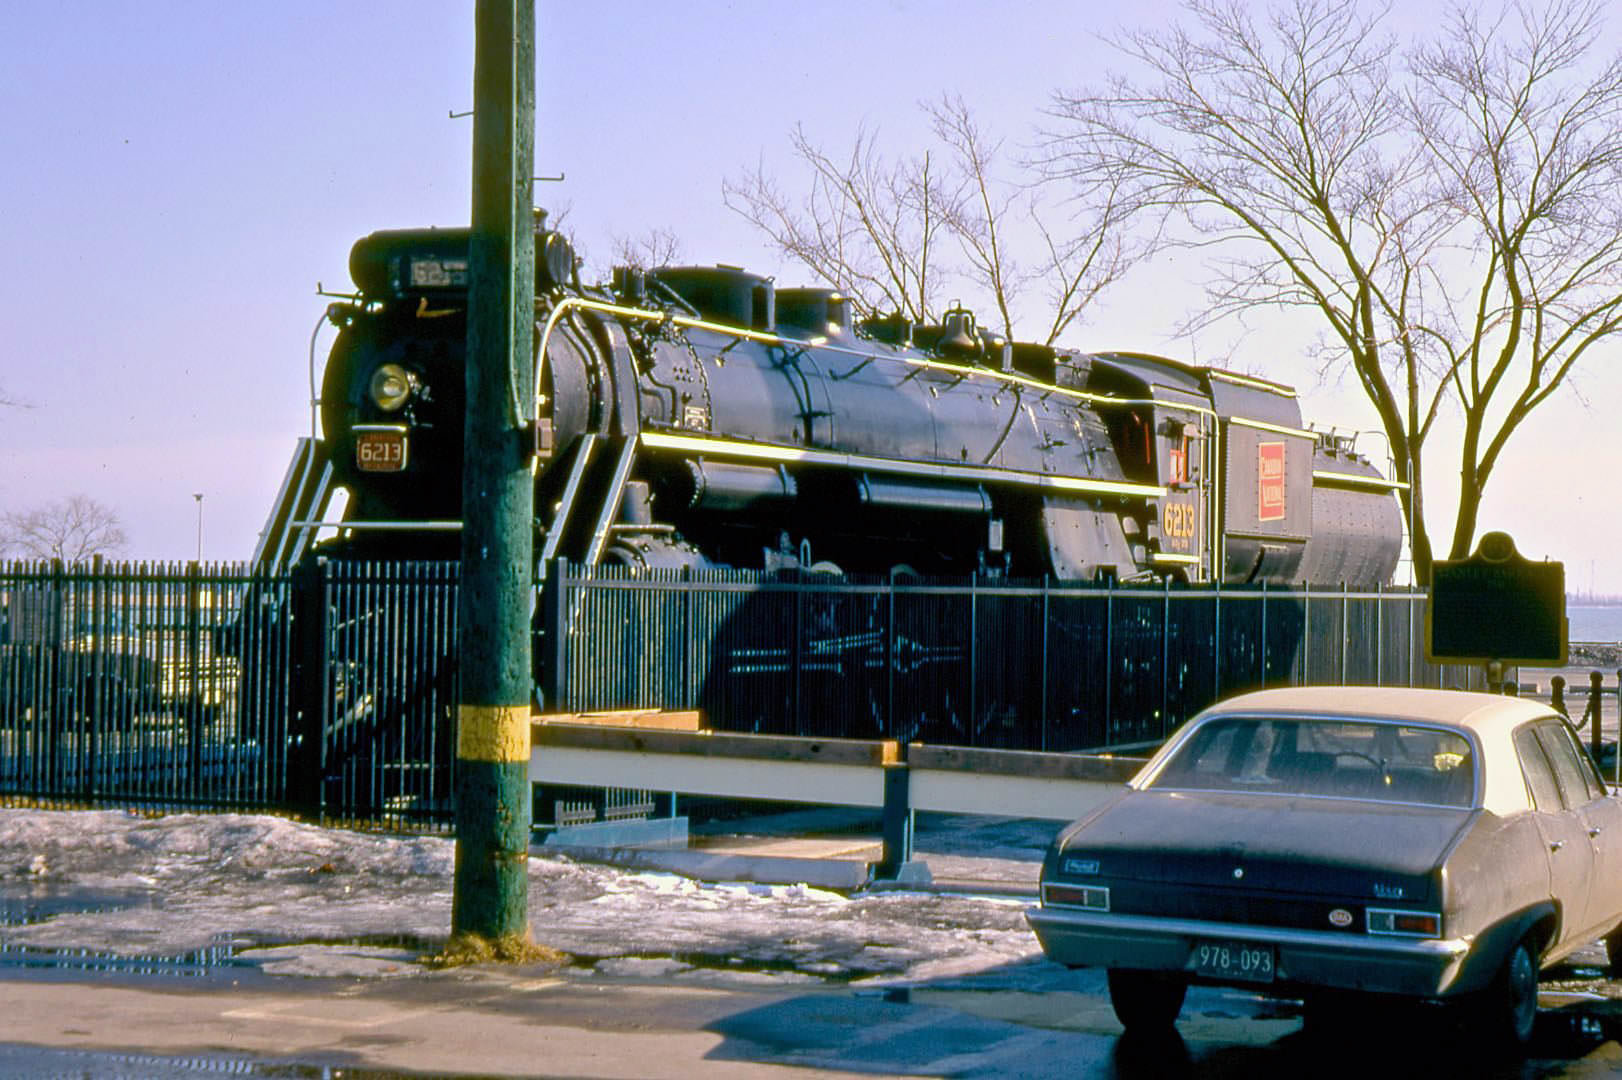 Canadian National Railways No. 6213 steam locomotive when it was located beside the Toronto Marine Museum, CNE grounds, 1970